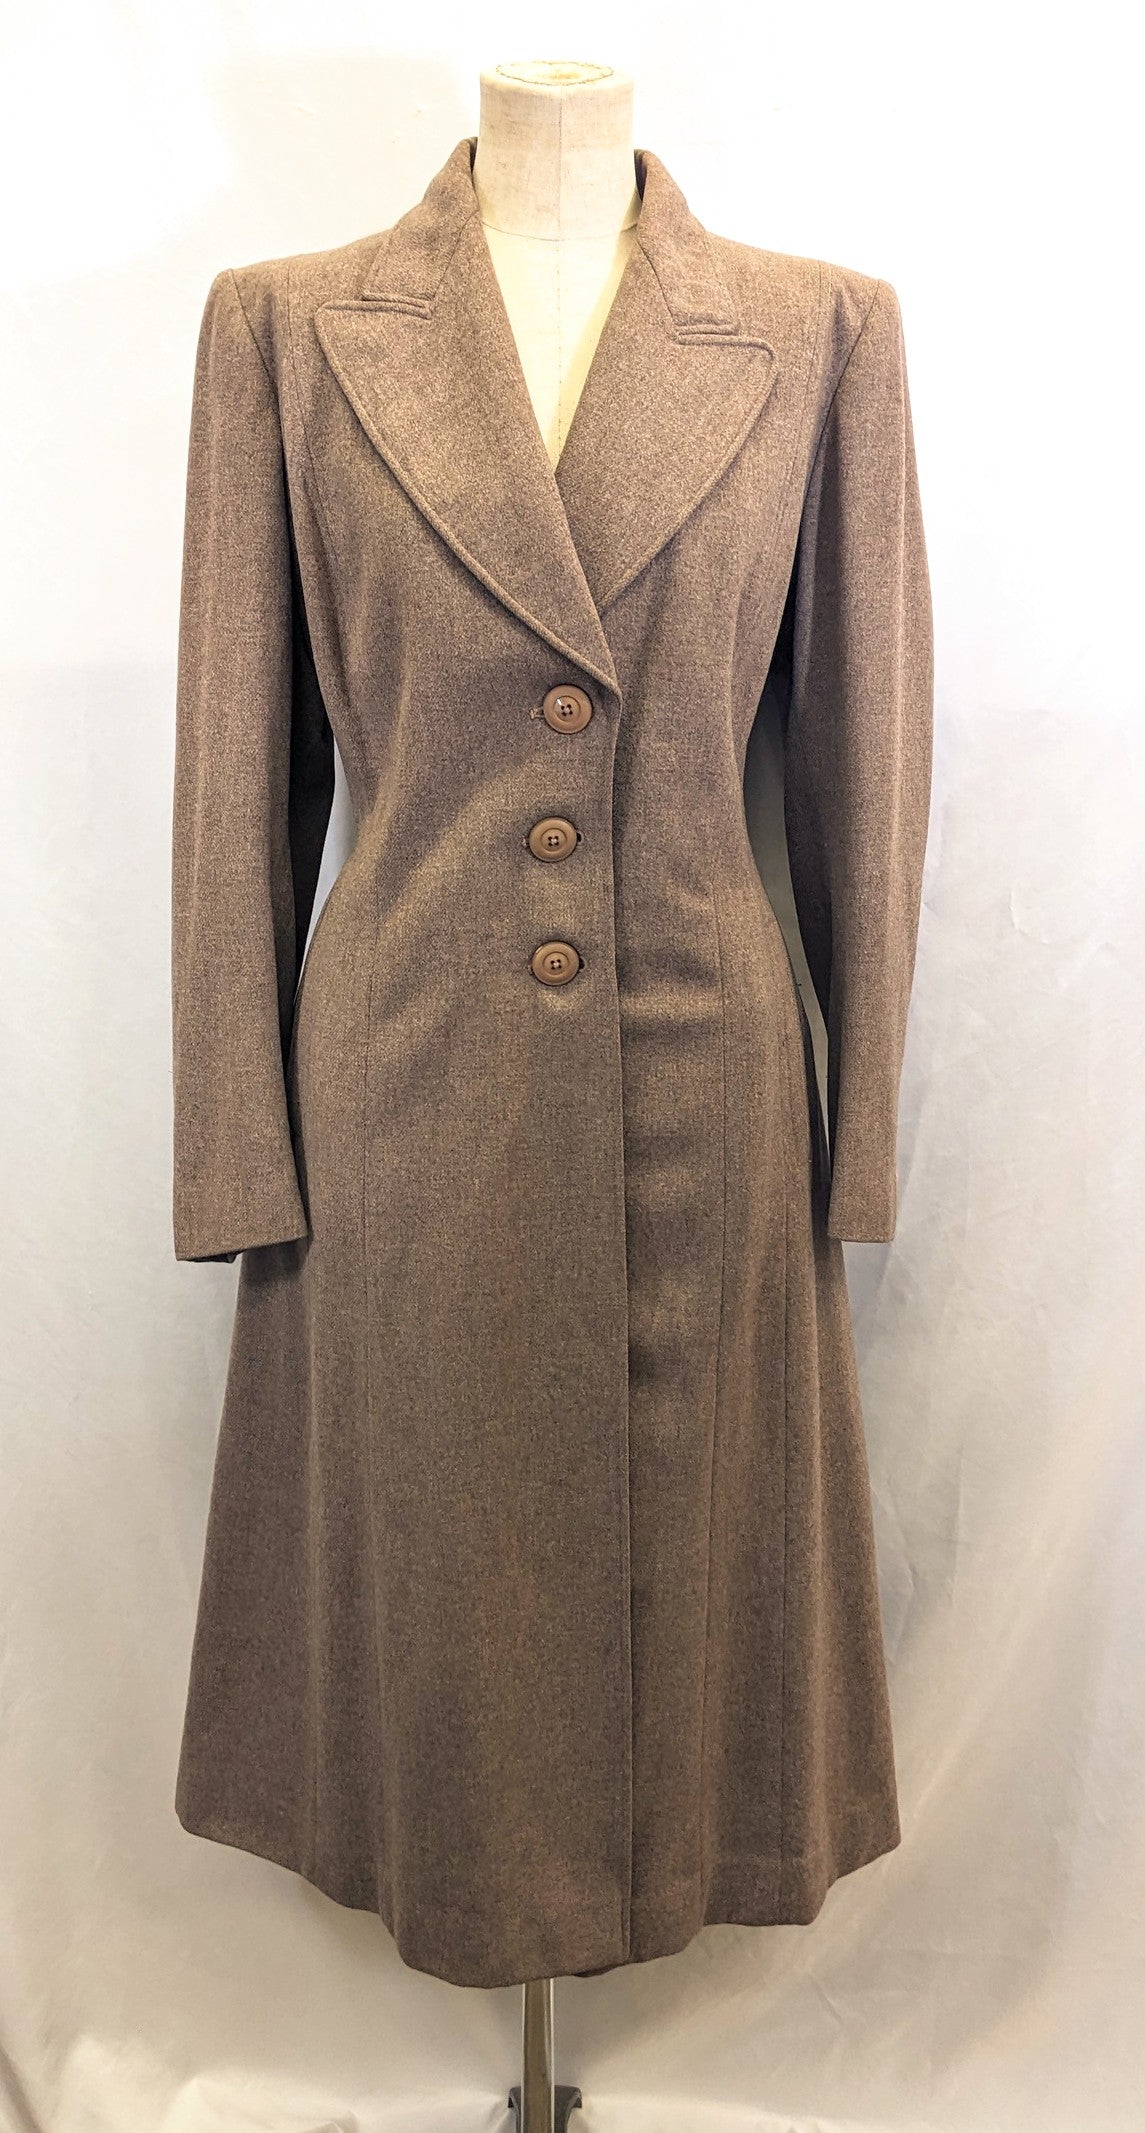 Late 1930s/Early 1940s Coat